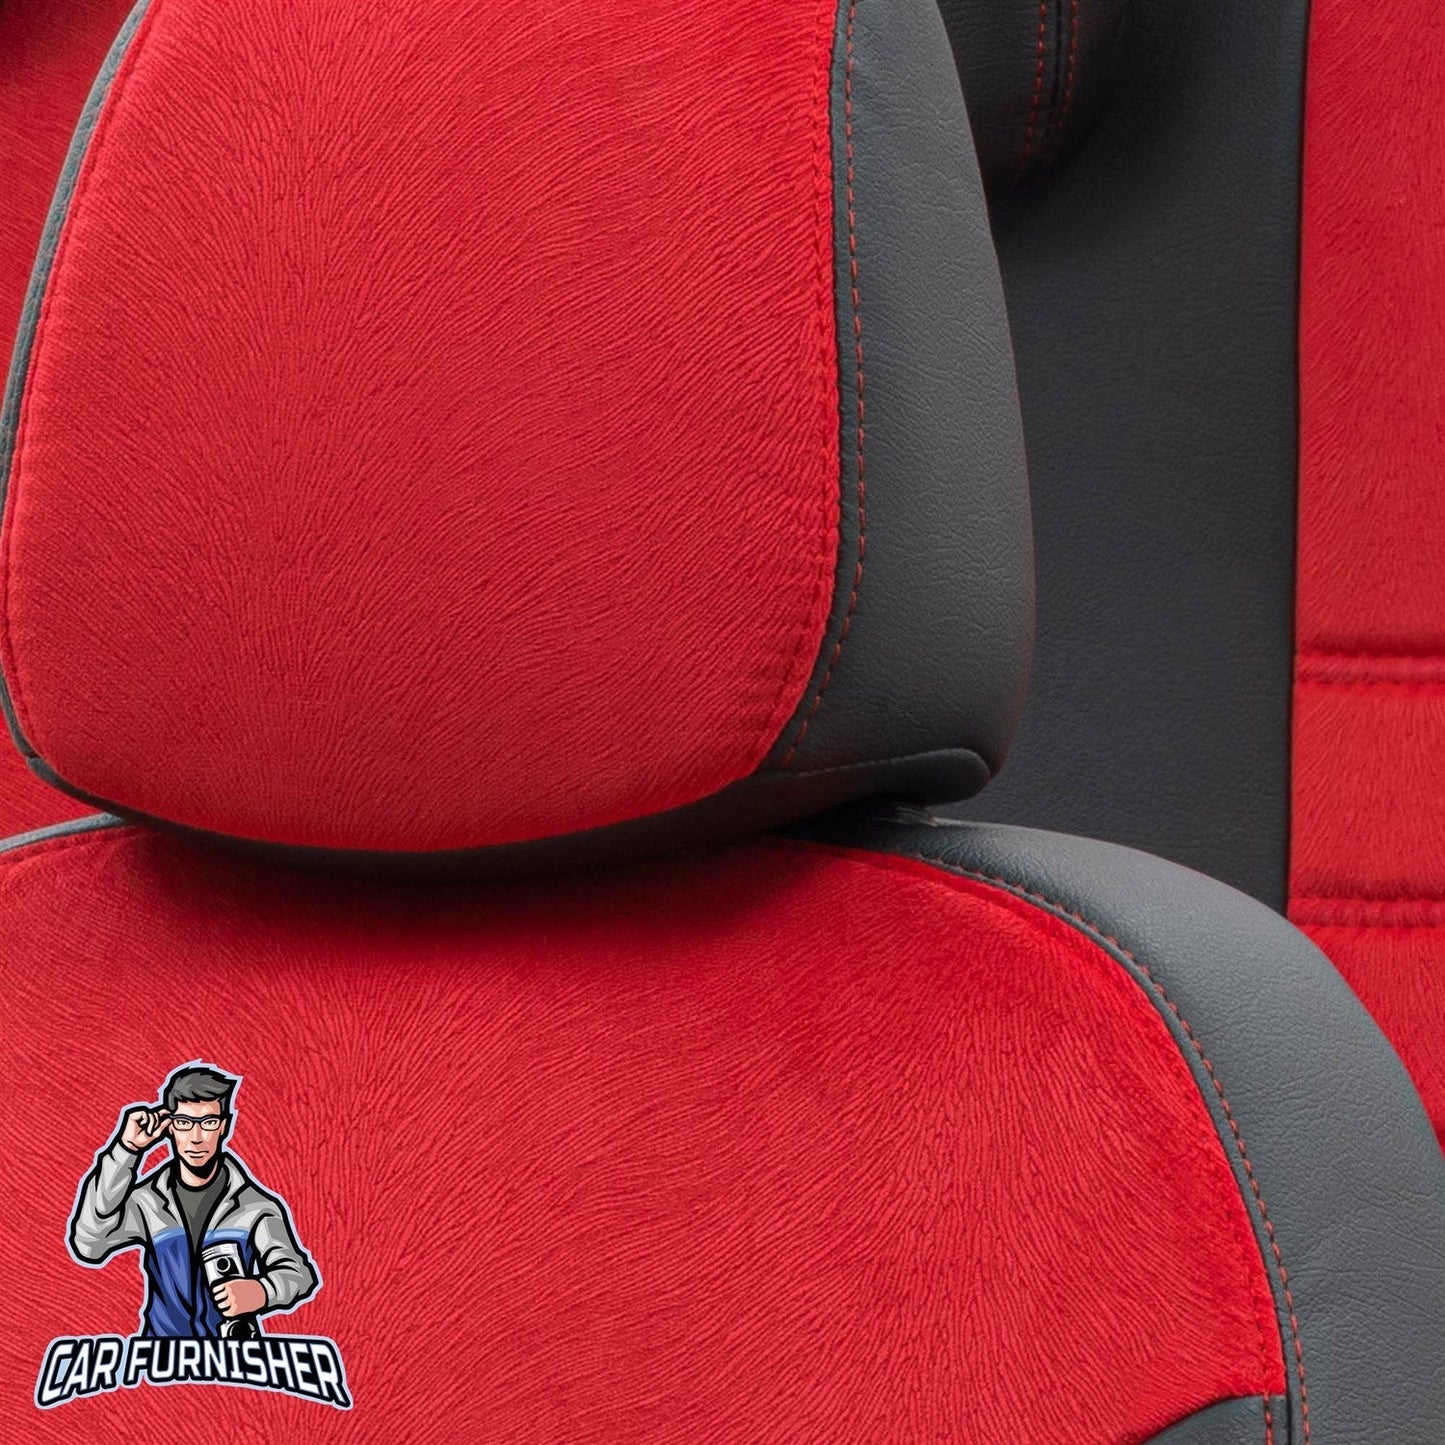 Seat Mii Seat Covers London Foal Feather Design Red Leather & Foal Feather